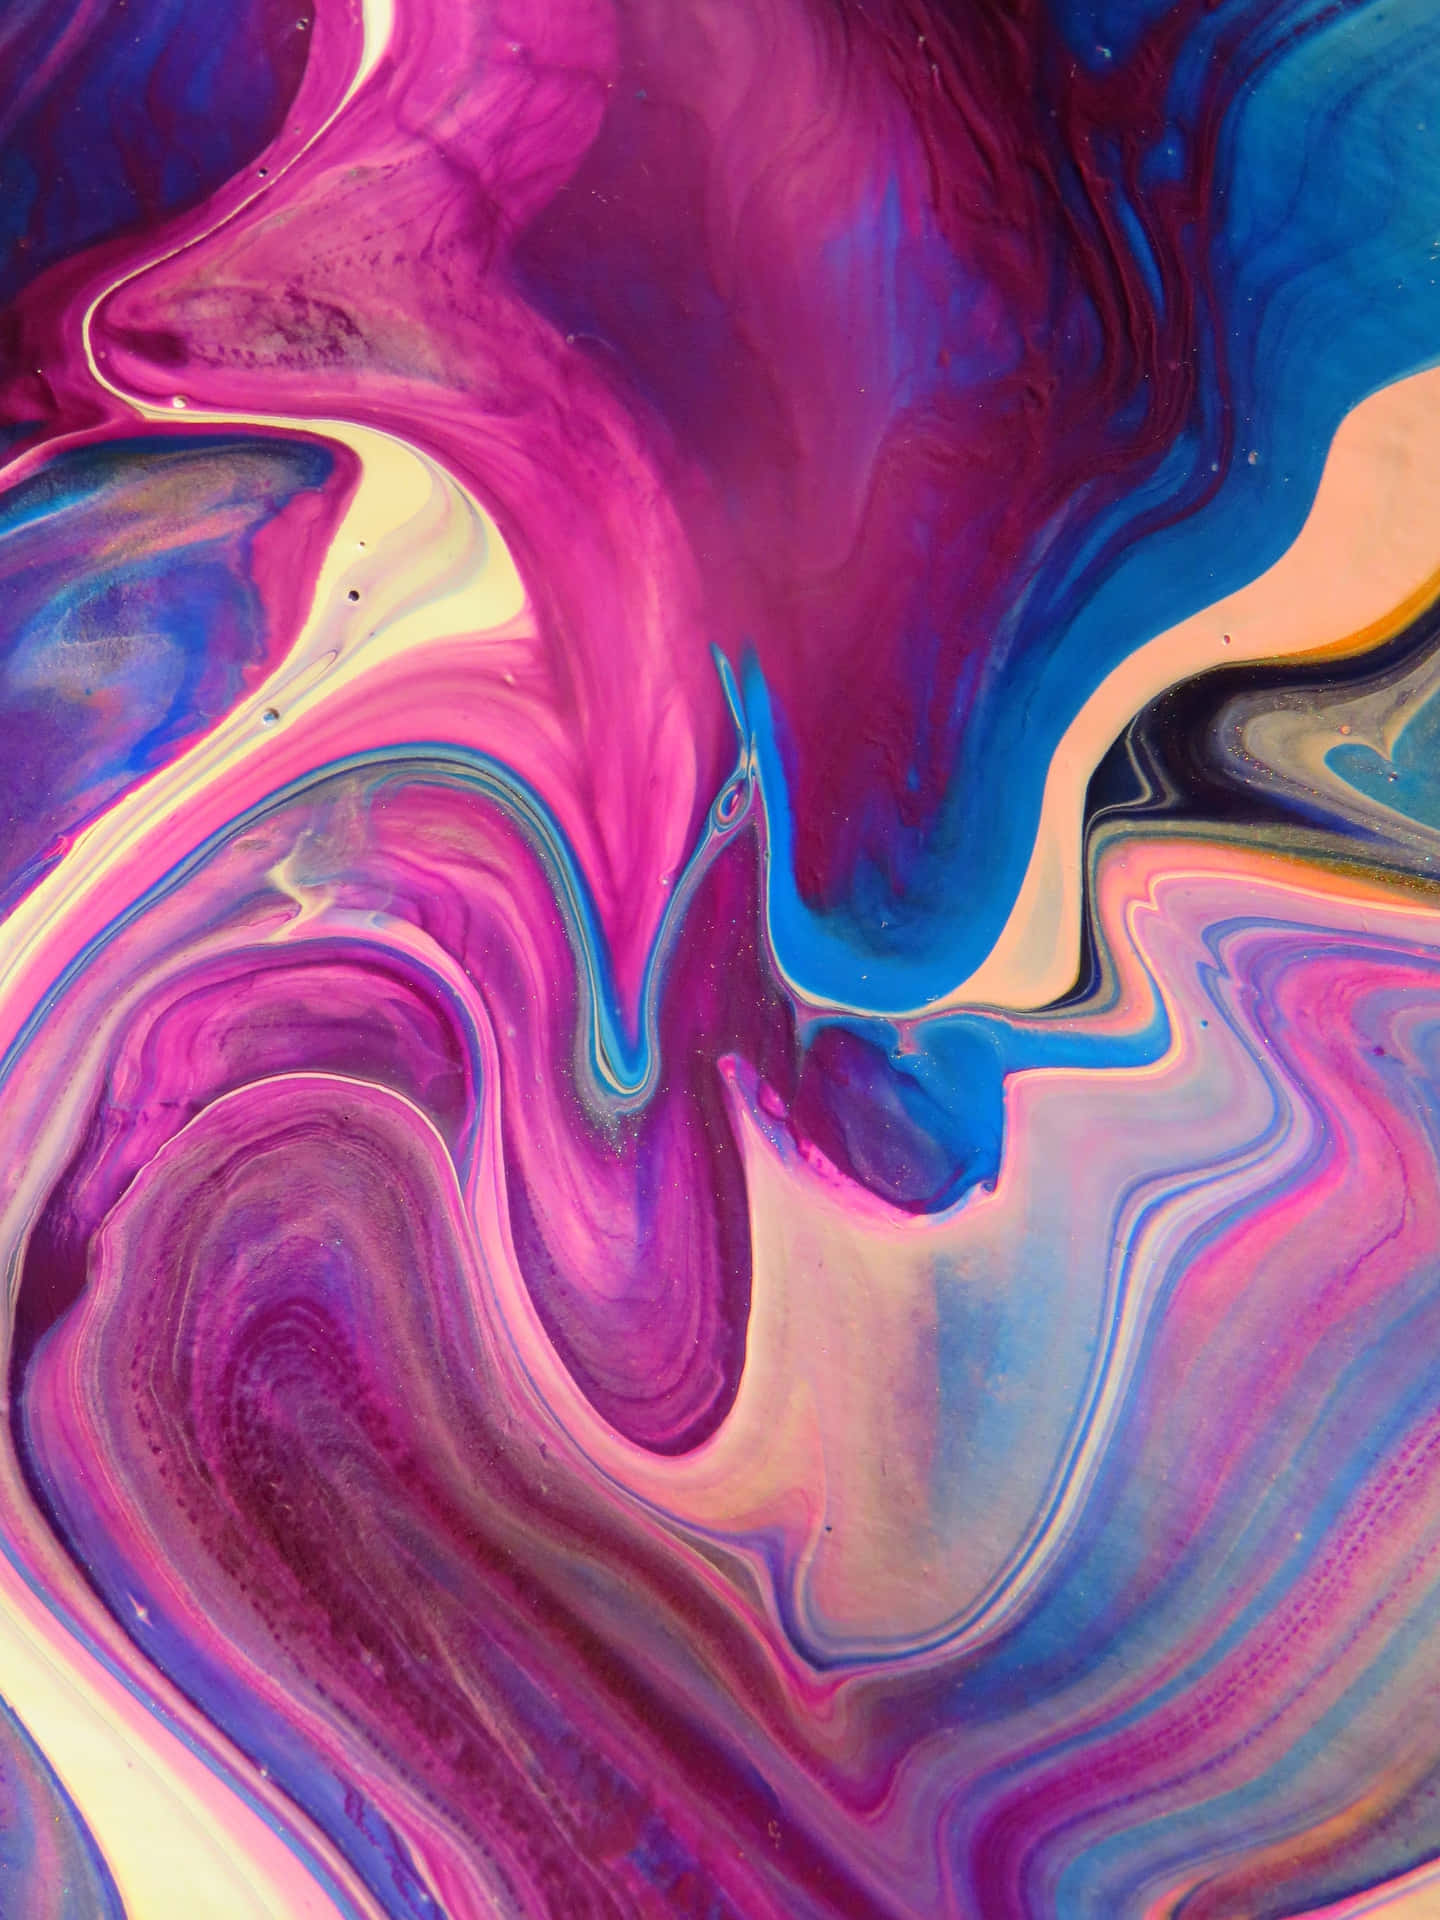 A Colorful Abstract Painting With Swirls Of Purple, Blue, And Pink